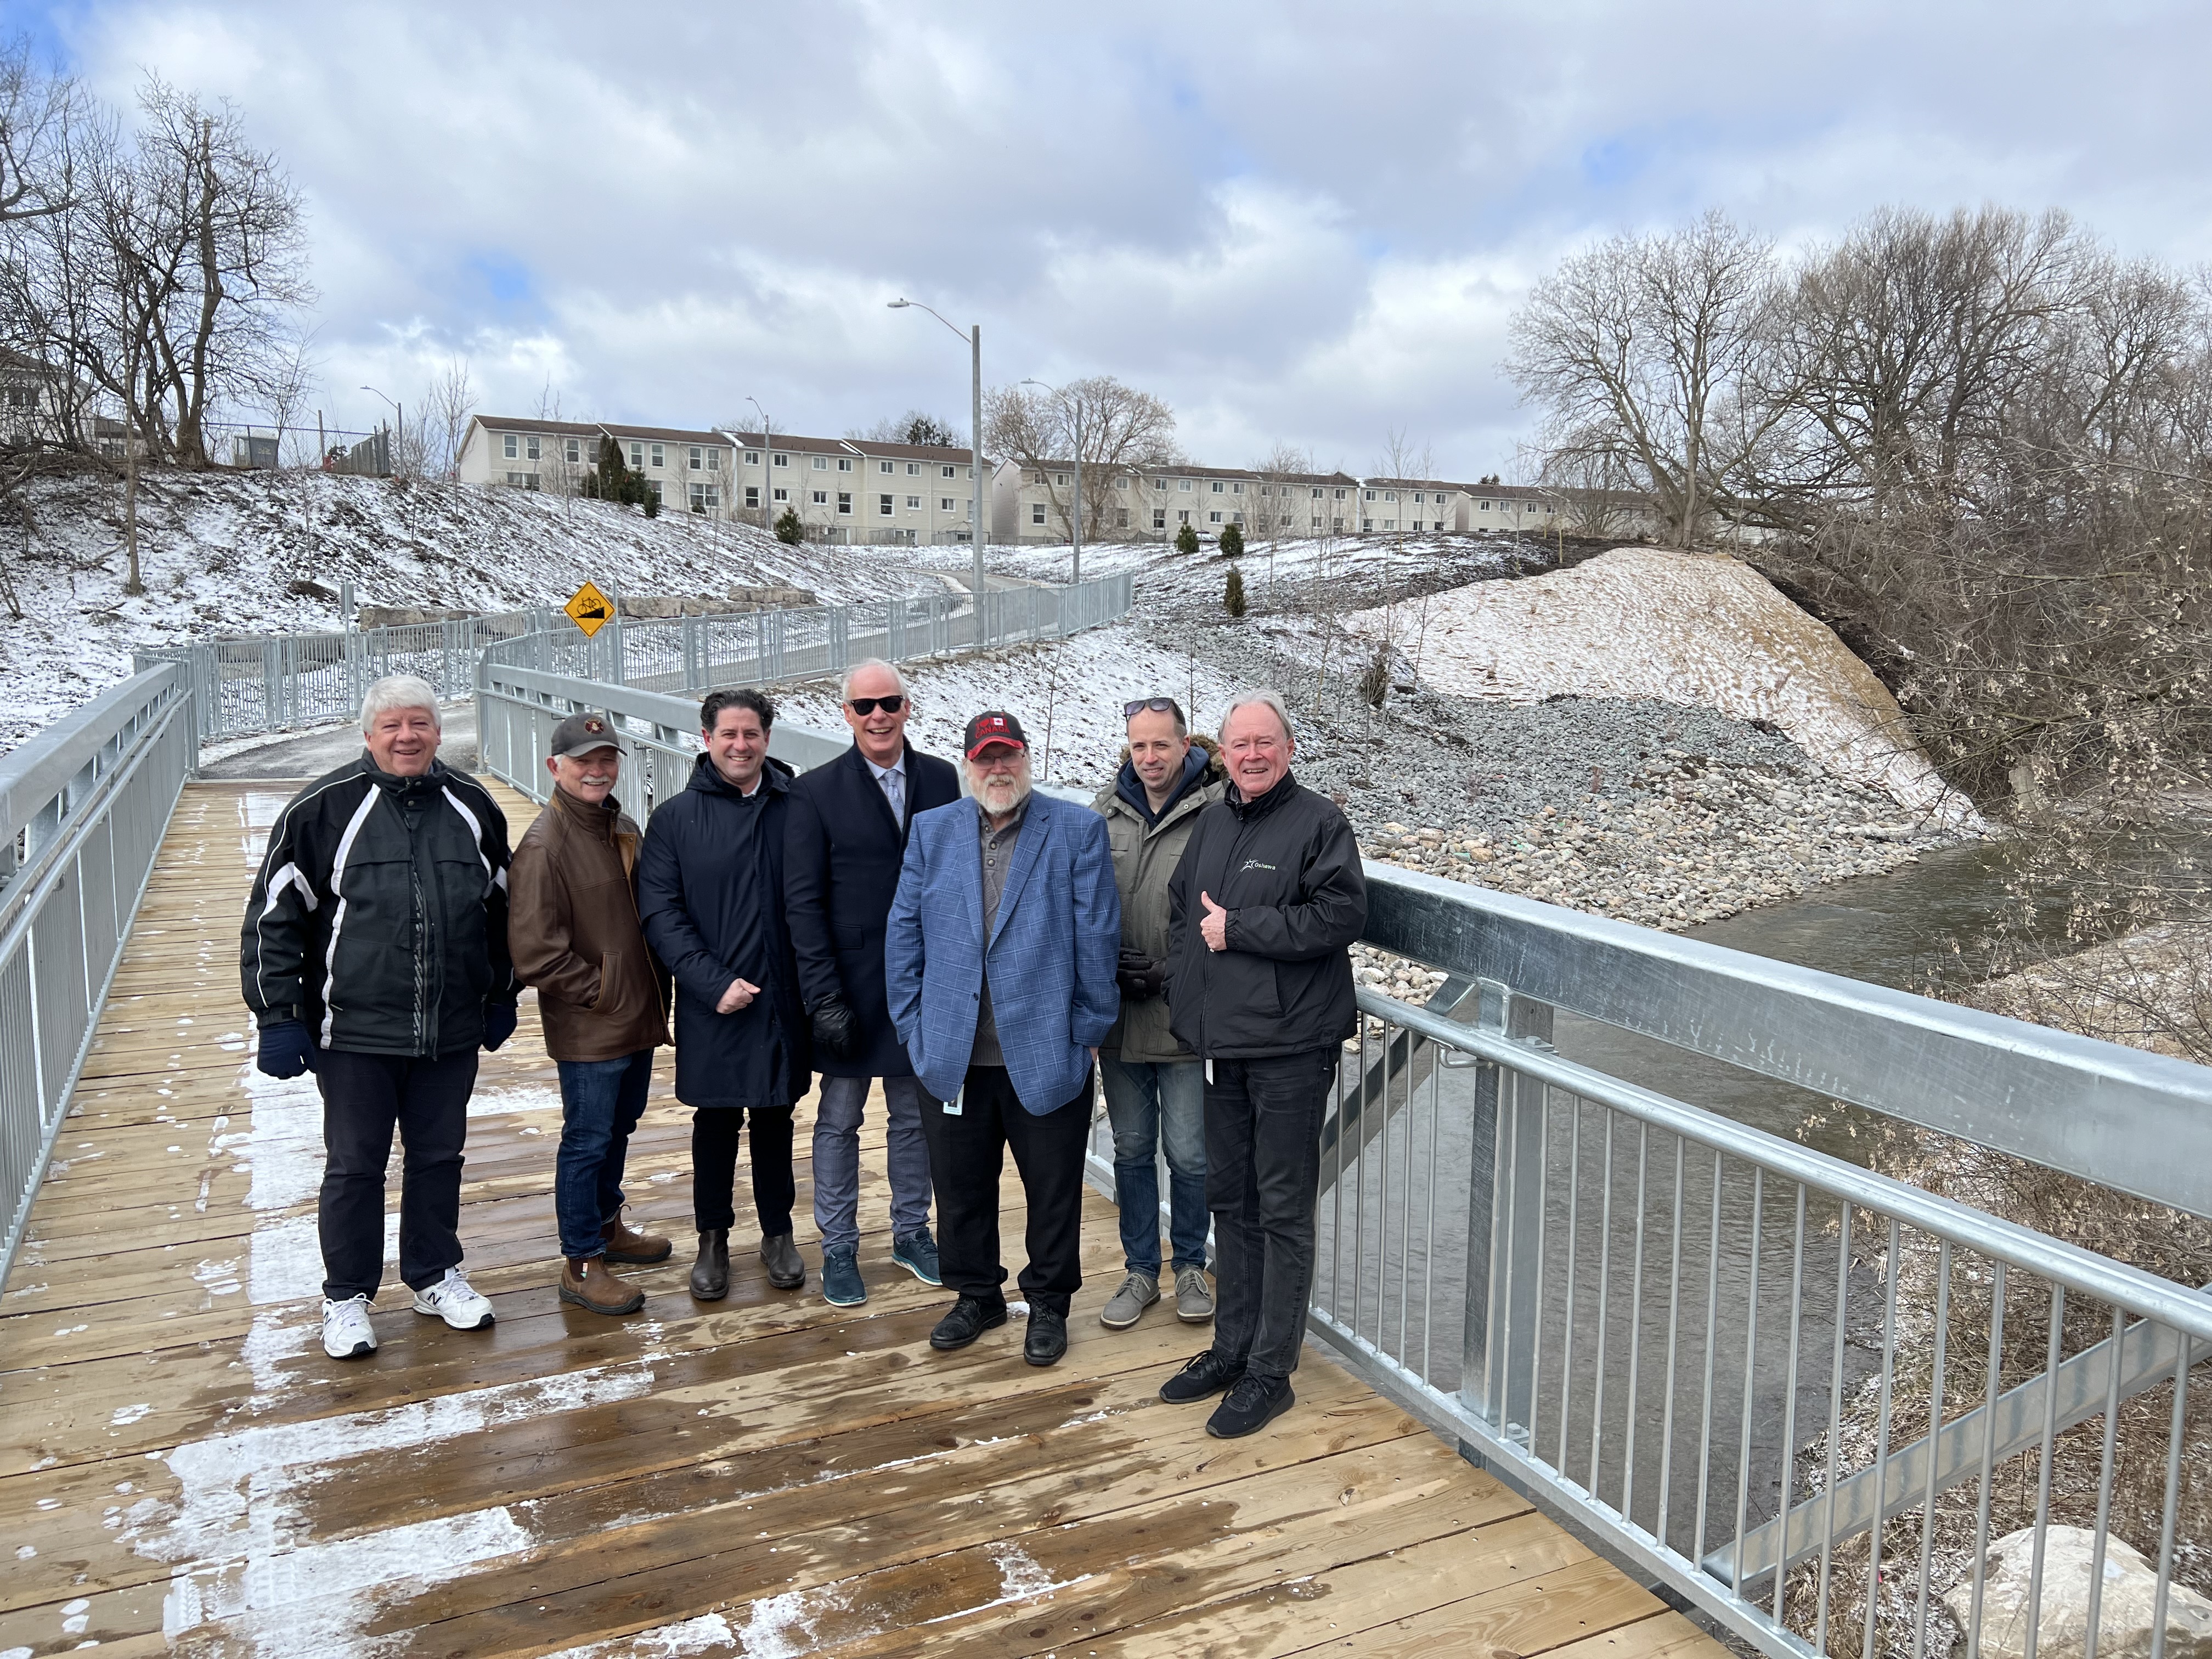 Members of Council at the newly constructed pedestrian bridge in Erie Park, from left – Ward 5 City Councillor John Gray, Ward 2 City Councillor Jim Lee,  Ward 2 Regional & City Councillor Tito-Dante Marimpietri, Mayor Dan Carter, Ward 5 Regional & City Councillor Brian Nicholson, Ward 4 City Councillor Derek Giberson and Ward 4 Regional & City Councillor Rick Kerr.